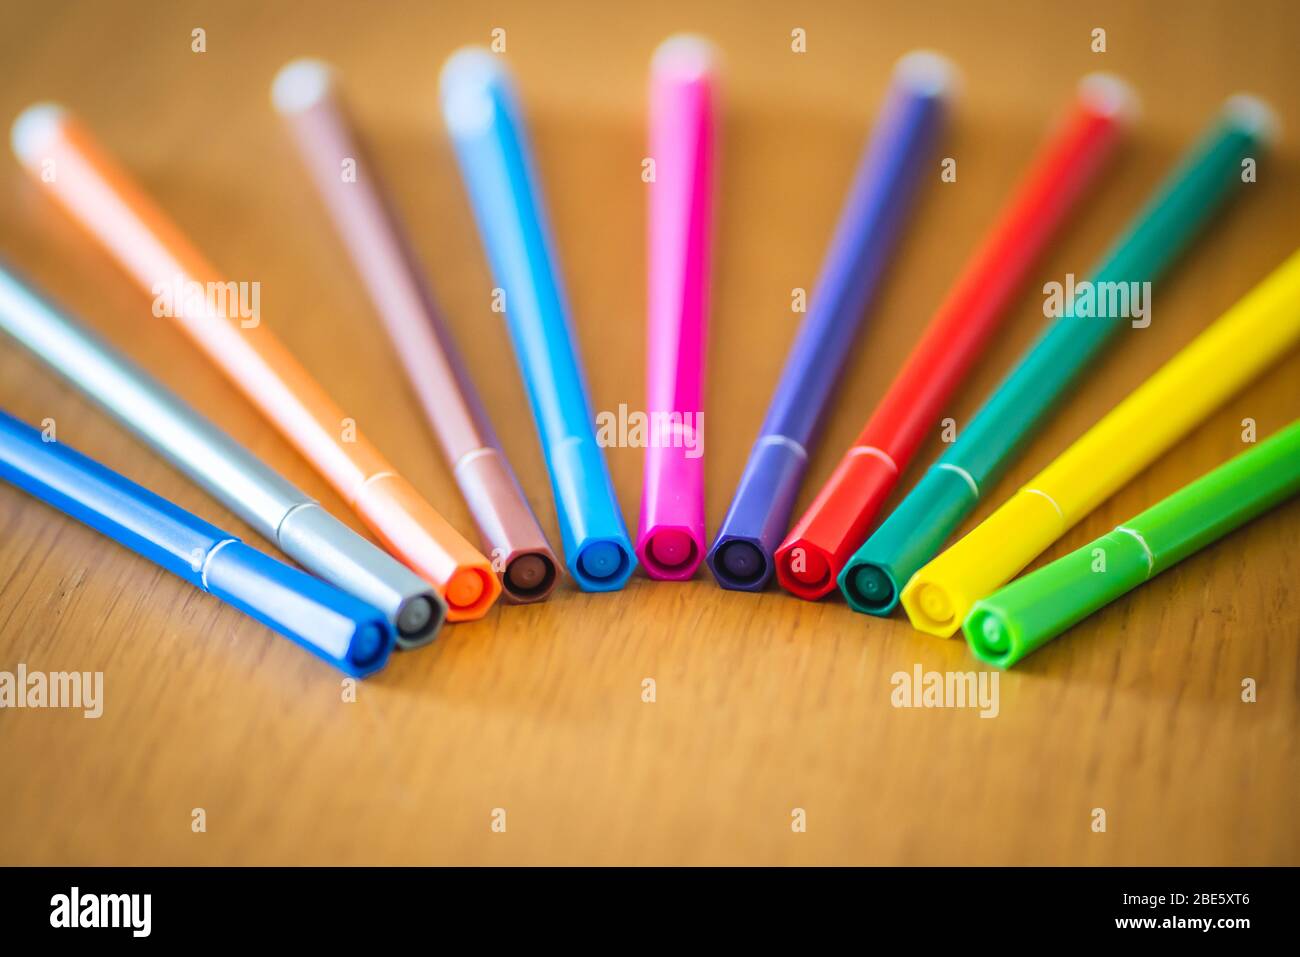 Colorful Set of Hema 12x2mm Writing Pens on a Wooden Desk Stock Photo -  Alamy